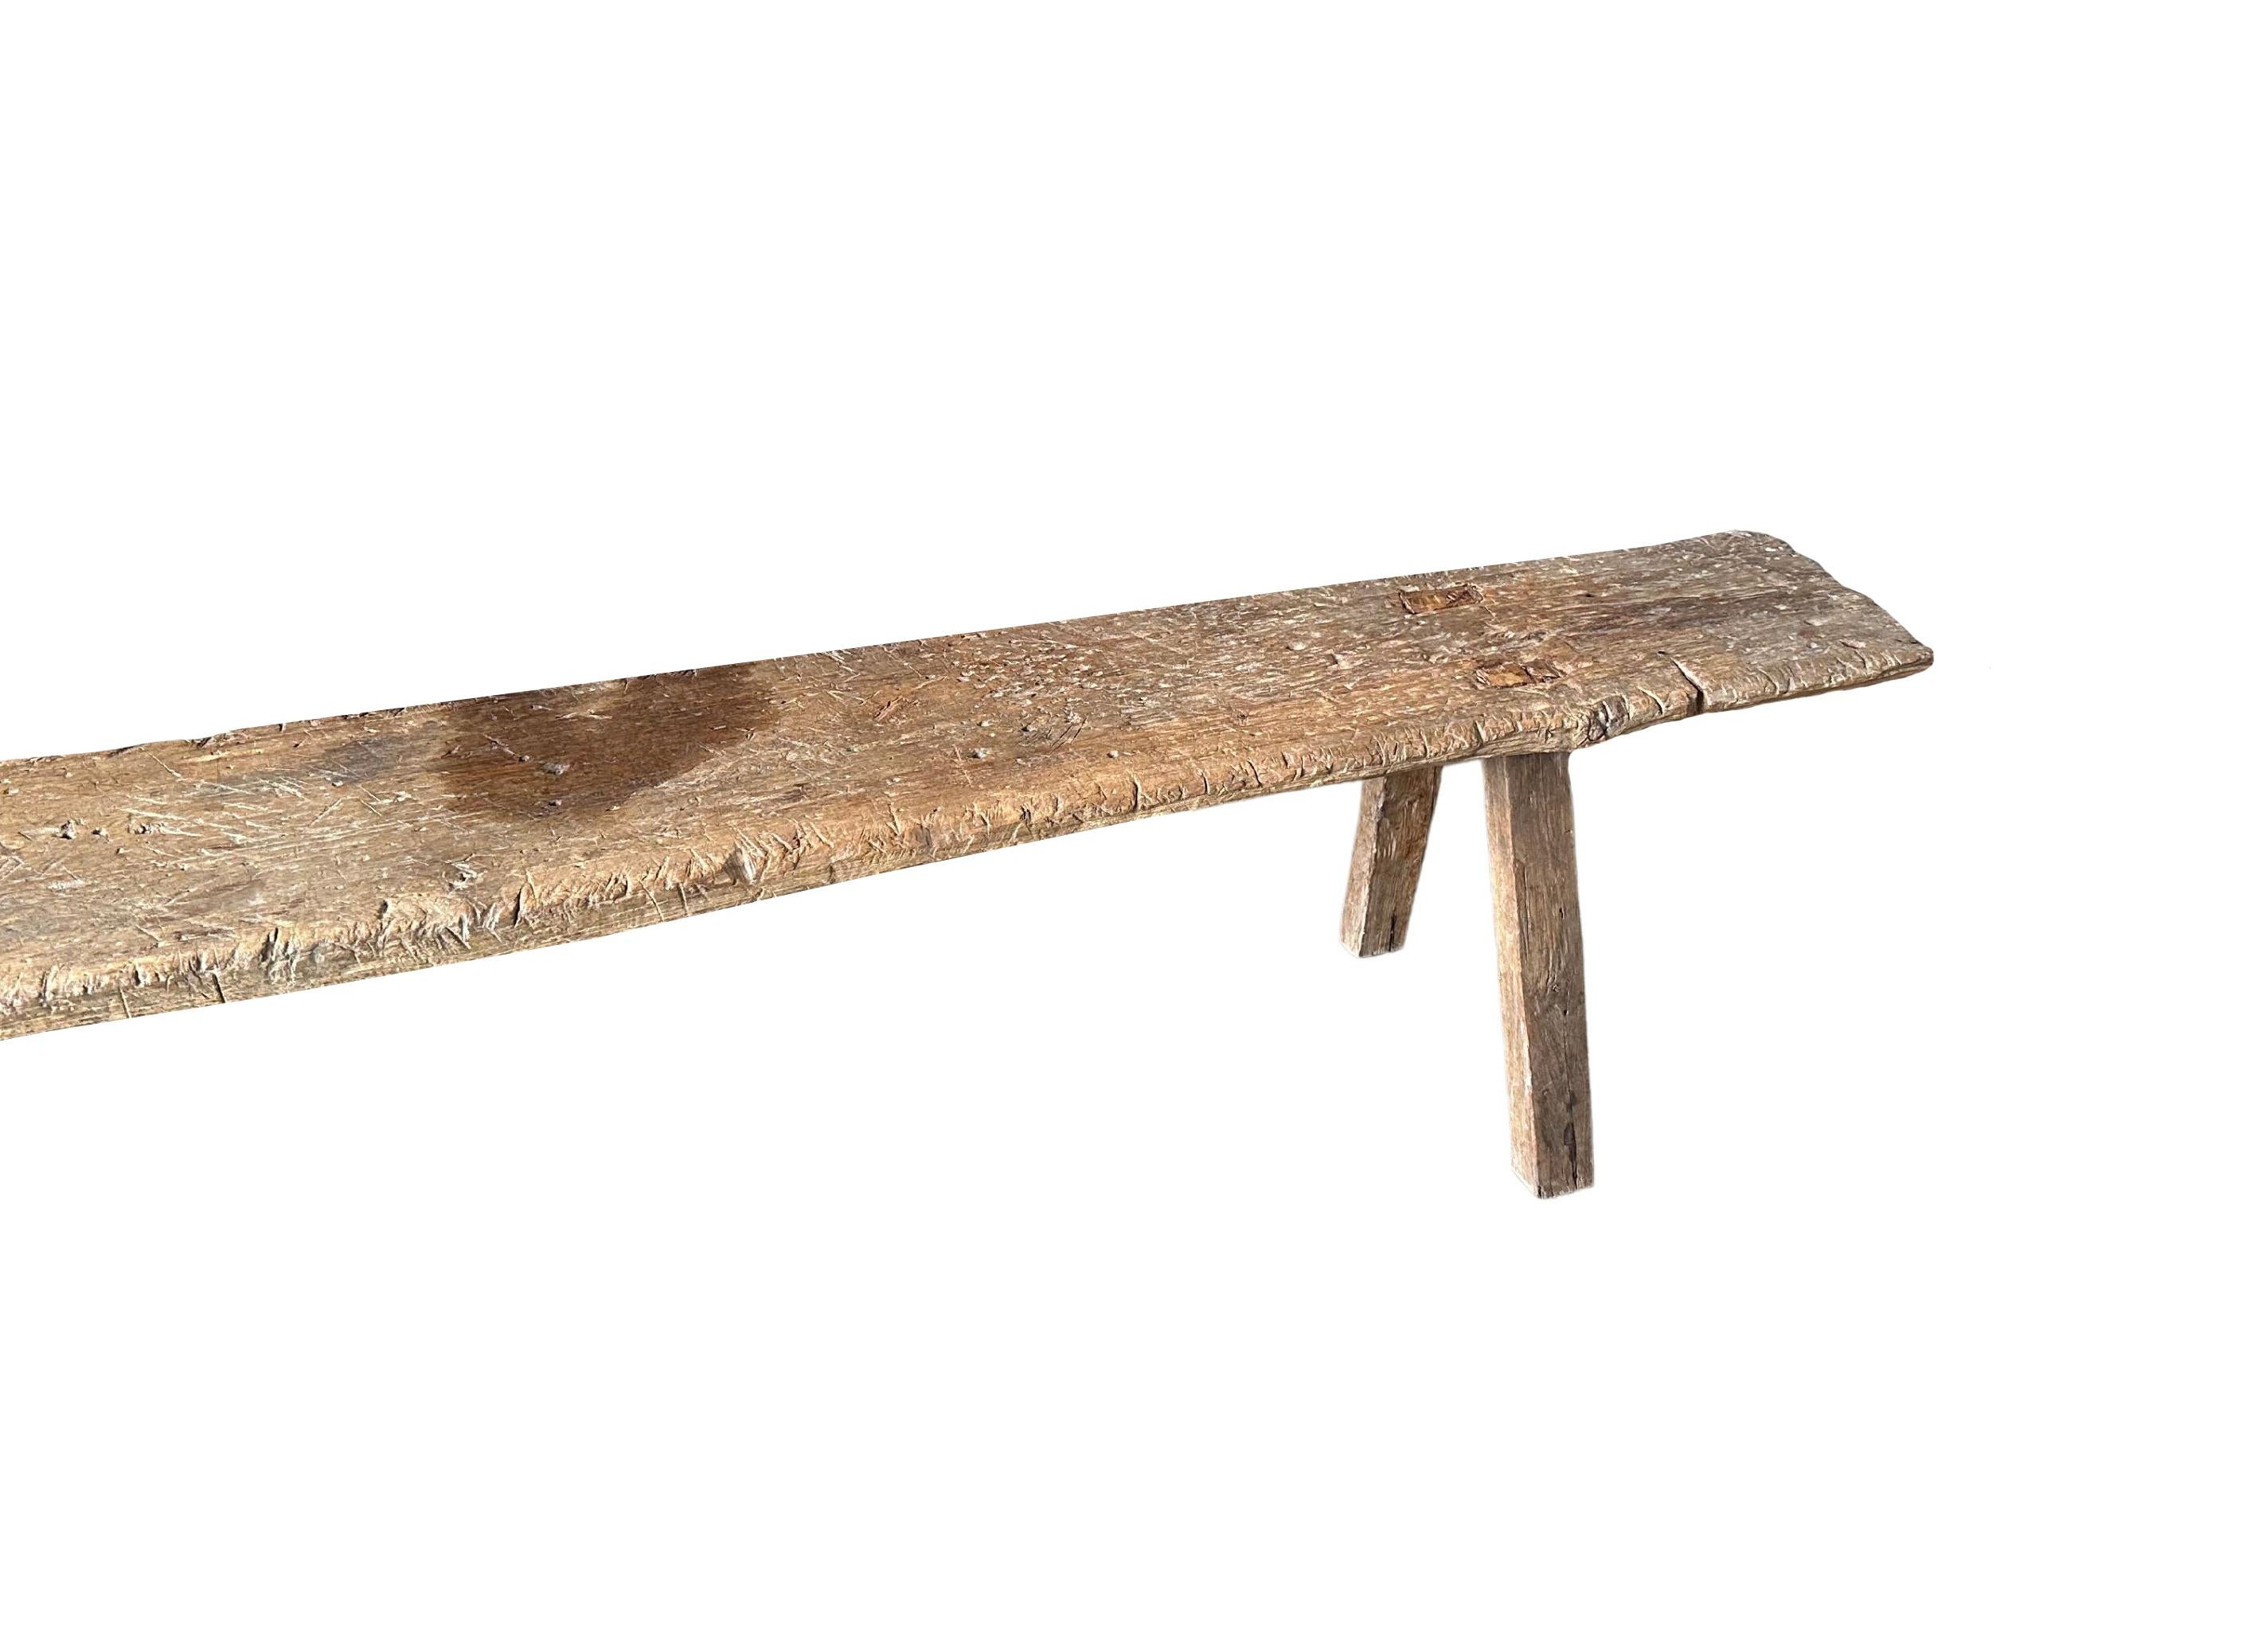 Other Sculptural Teak Bench Hand-Carved from Madura Island, Java, Indonesia, C. 1950